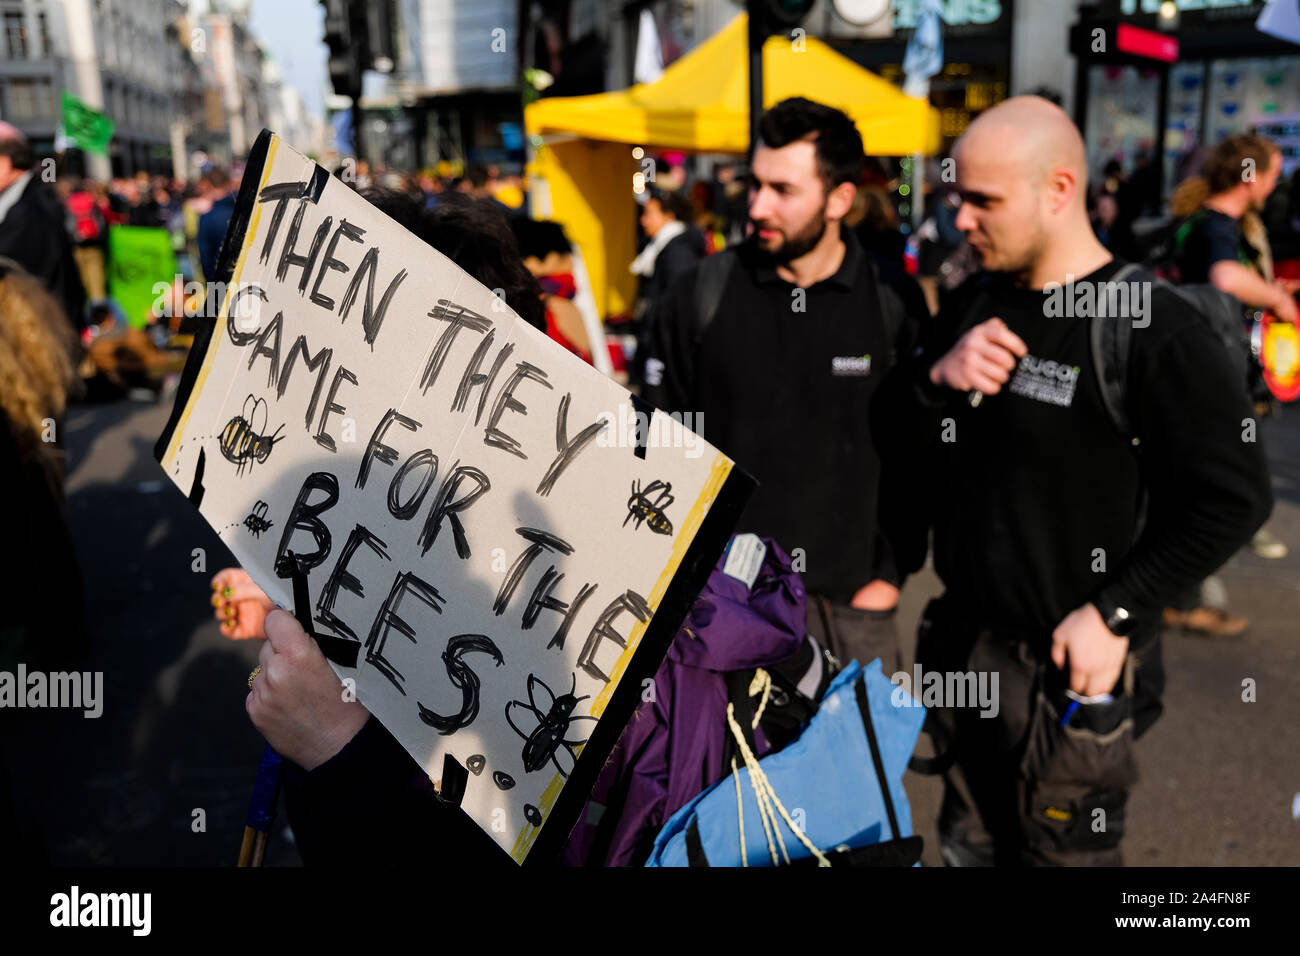 London, UK. A protester holds a sign at Oxford Circus as London comes to a standstill as protesters with the Extinction Rebellion protest crowd the st Stock Photo